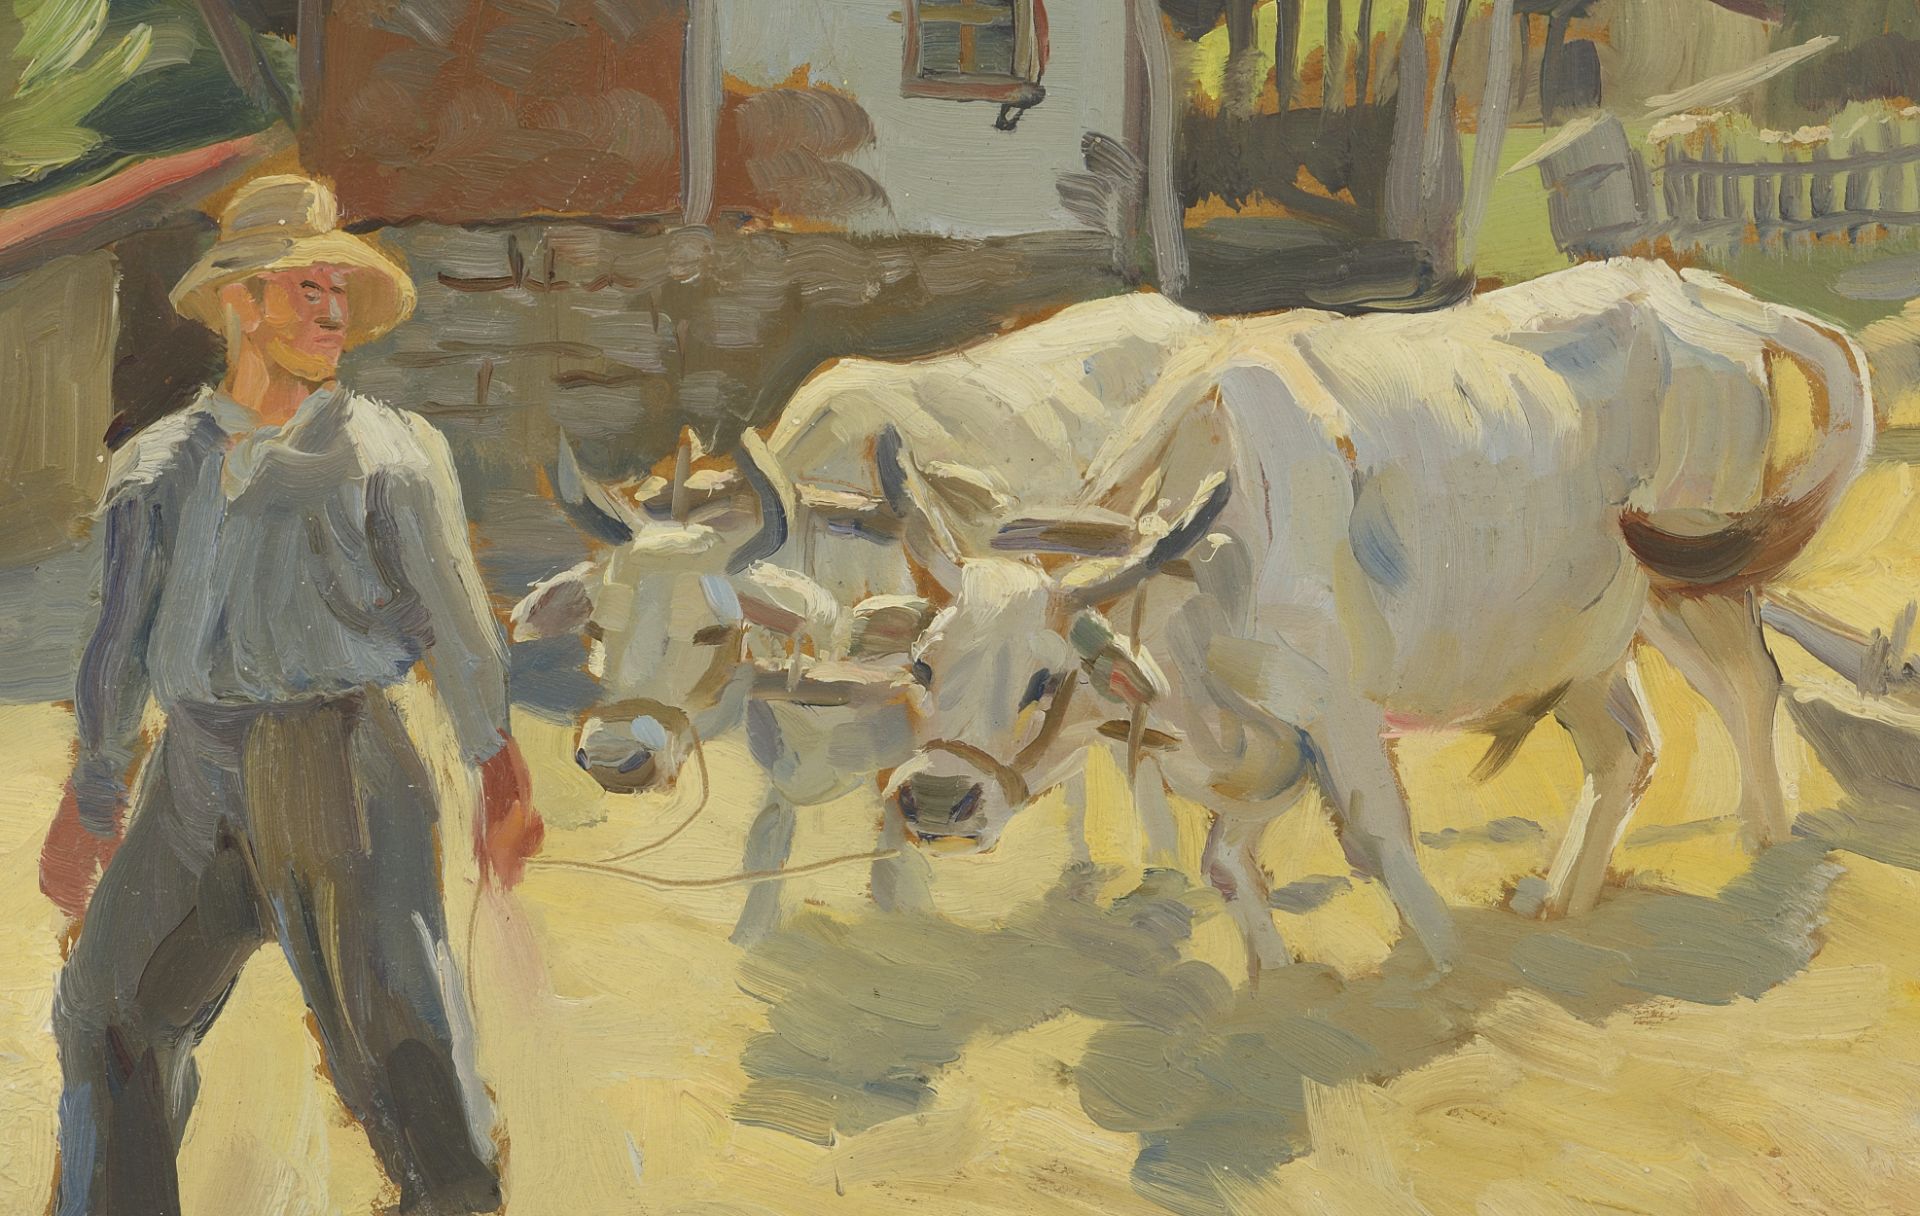 Ivan Petrov Ivanov /1909-1991/ "Thresh with the White Oxen" - Image 3 of 4